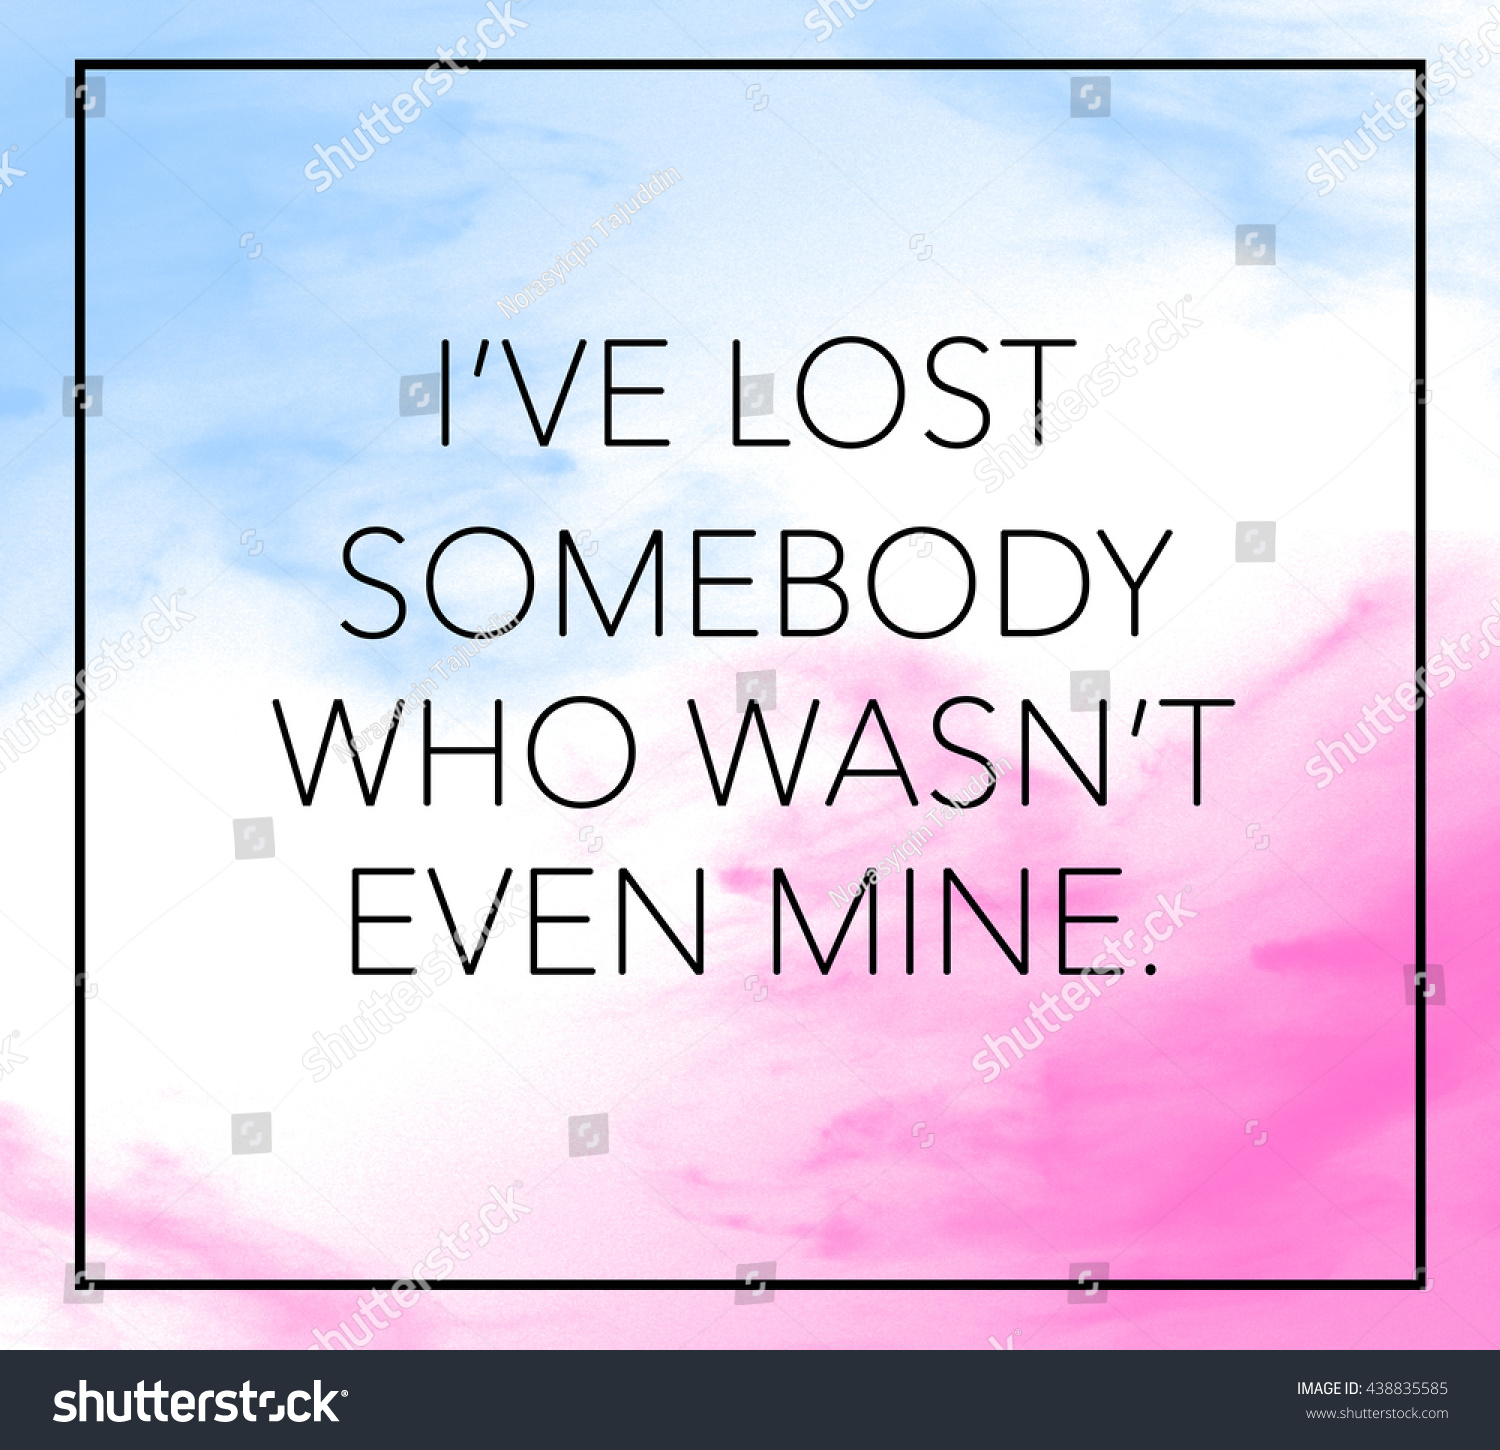 Love inspirational quote with phrase "I ve lost somebody who wasn t even mine" with color splash brushed background